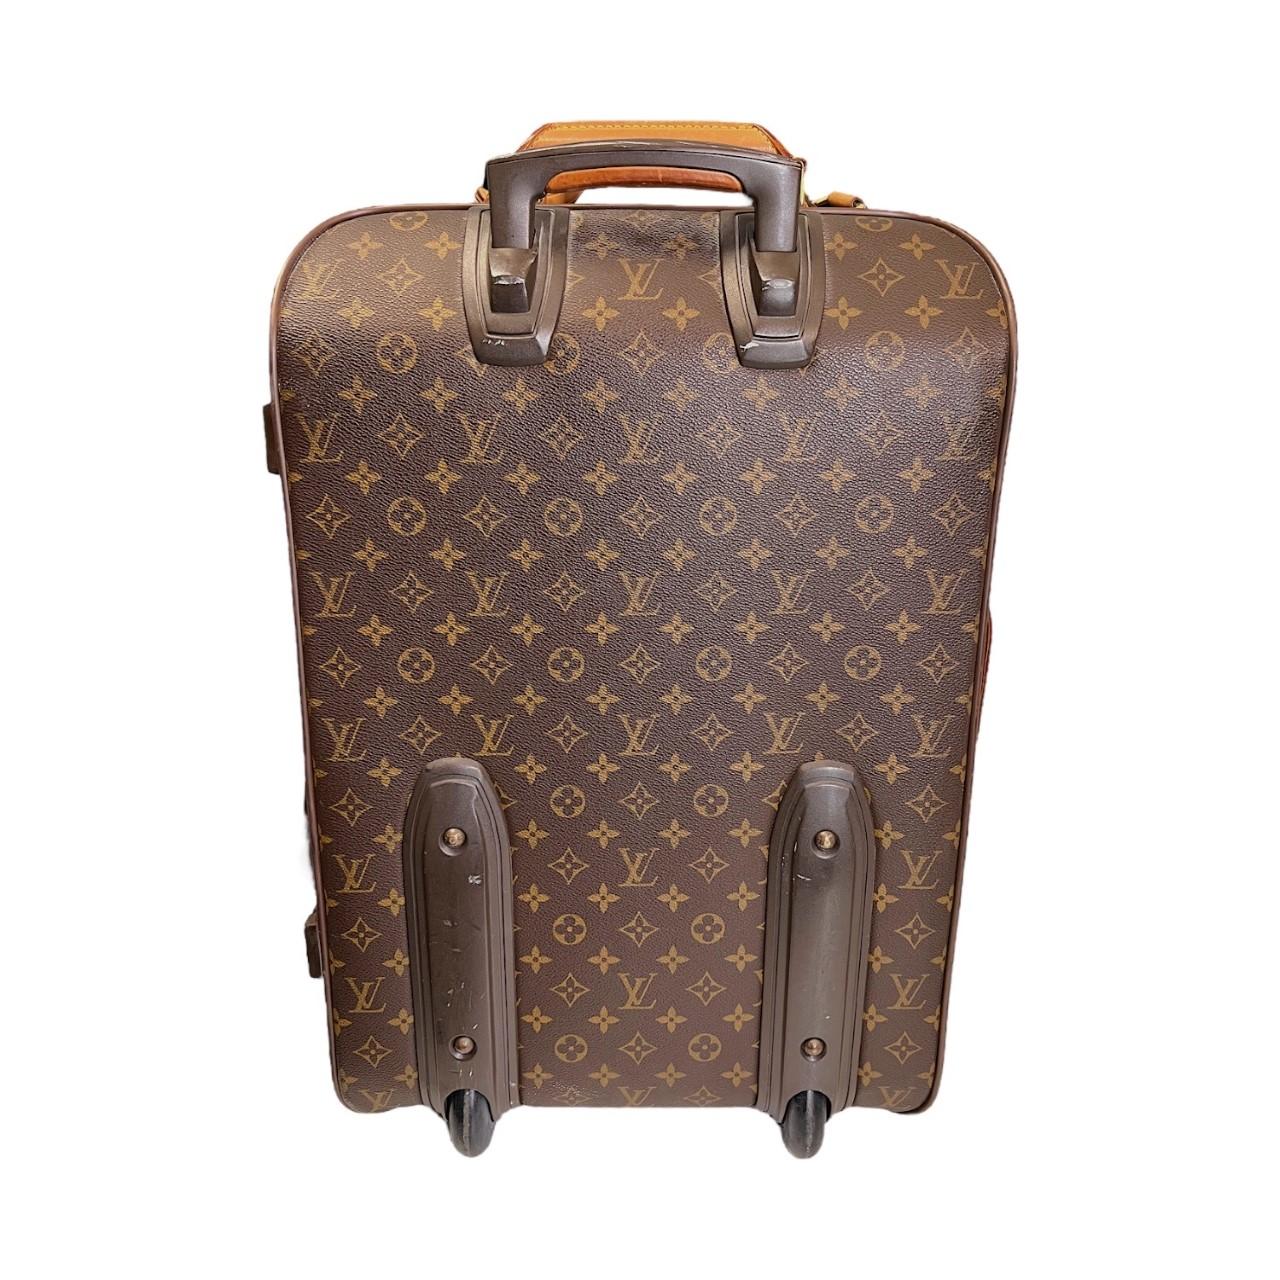 We are offering this Louis Vuitton Pegase 45 rolling suitcase. Made in France, it is crafted the classic brown Louis Vuitton monogram coated canvas with leather trimming with a leather corner accent and gold-tone brass hardware. It features a